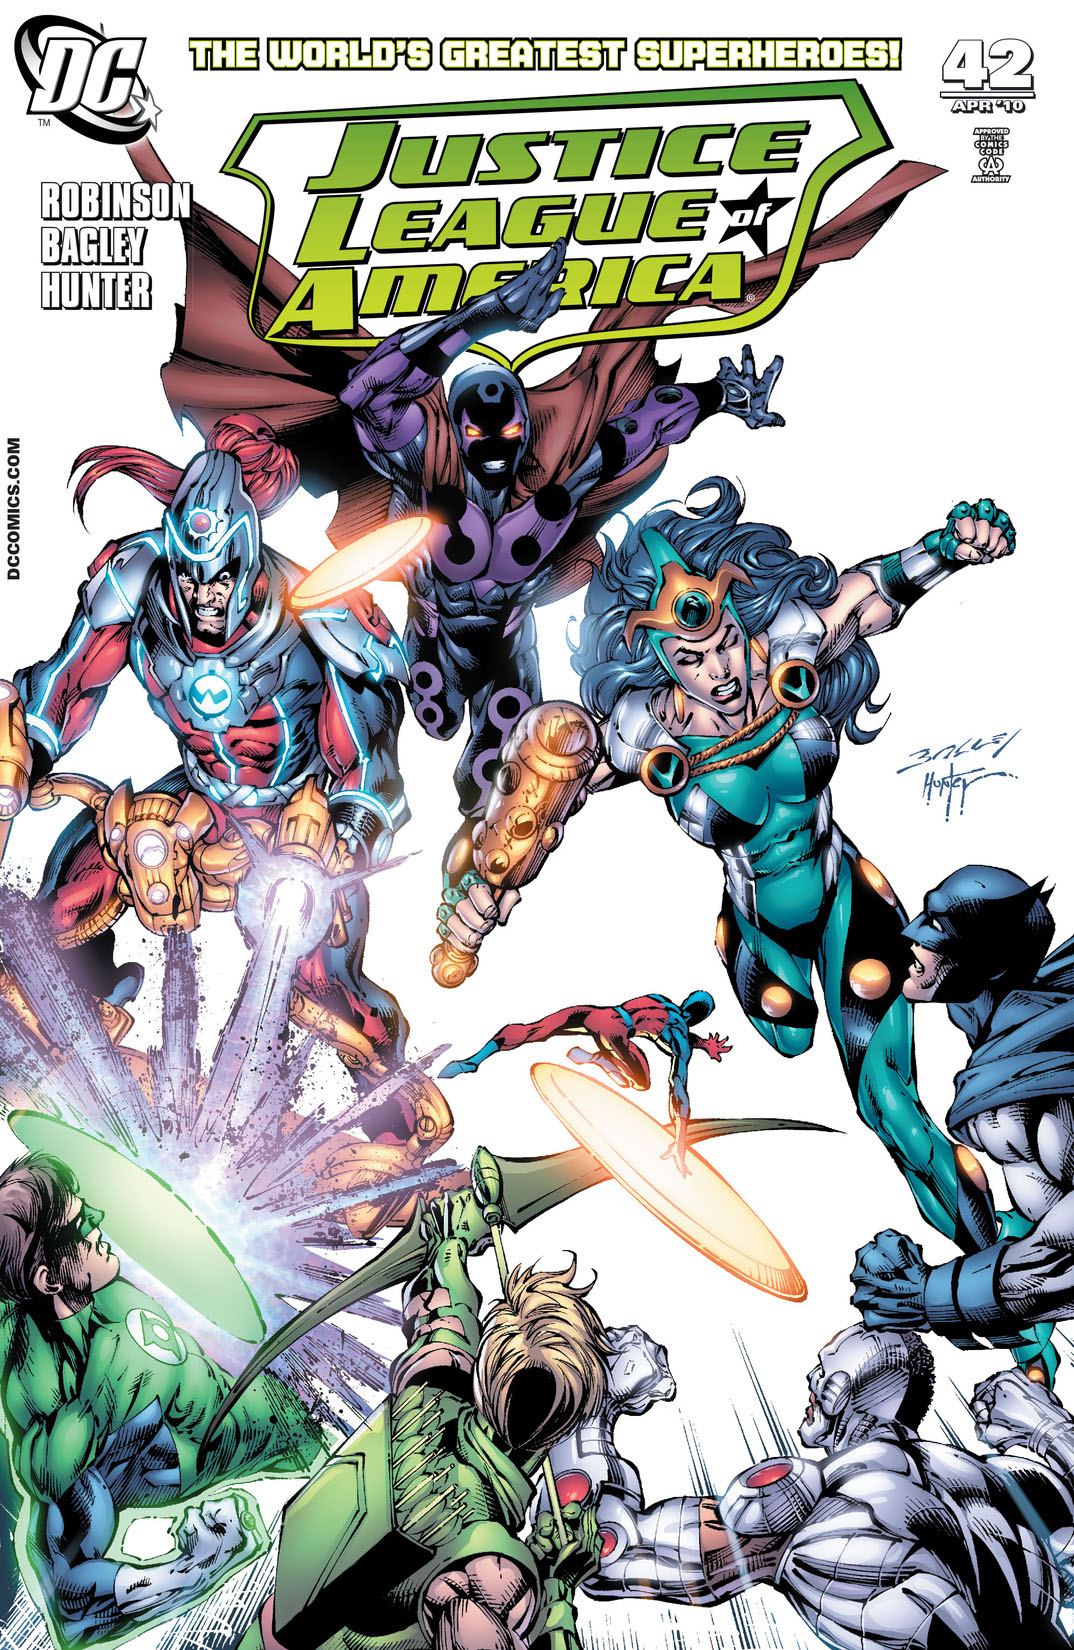 Justice League of America (2006-) #42 preview images